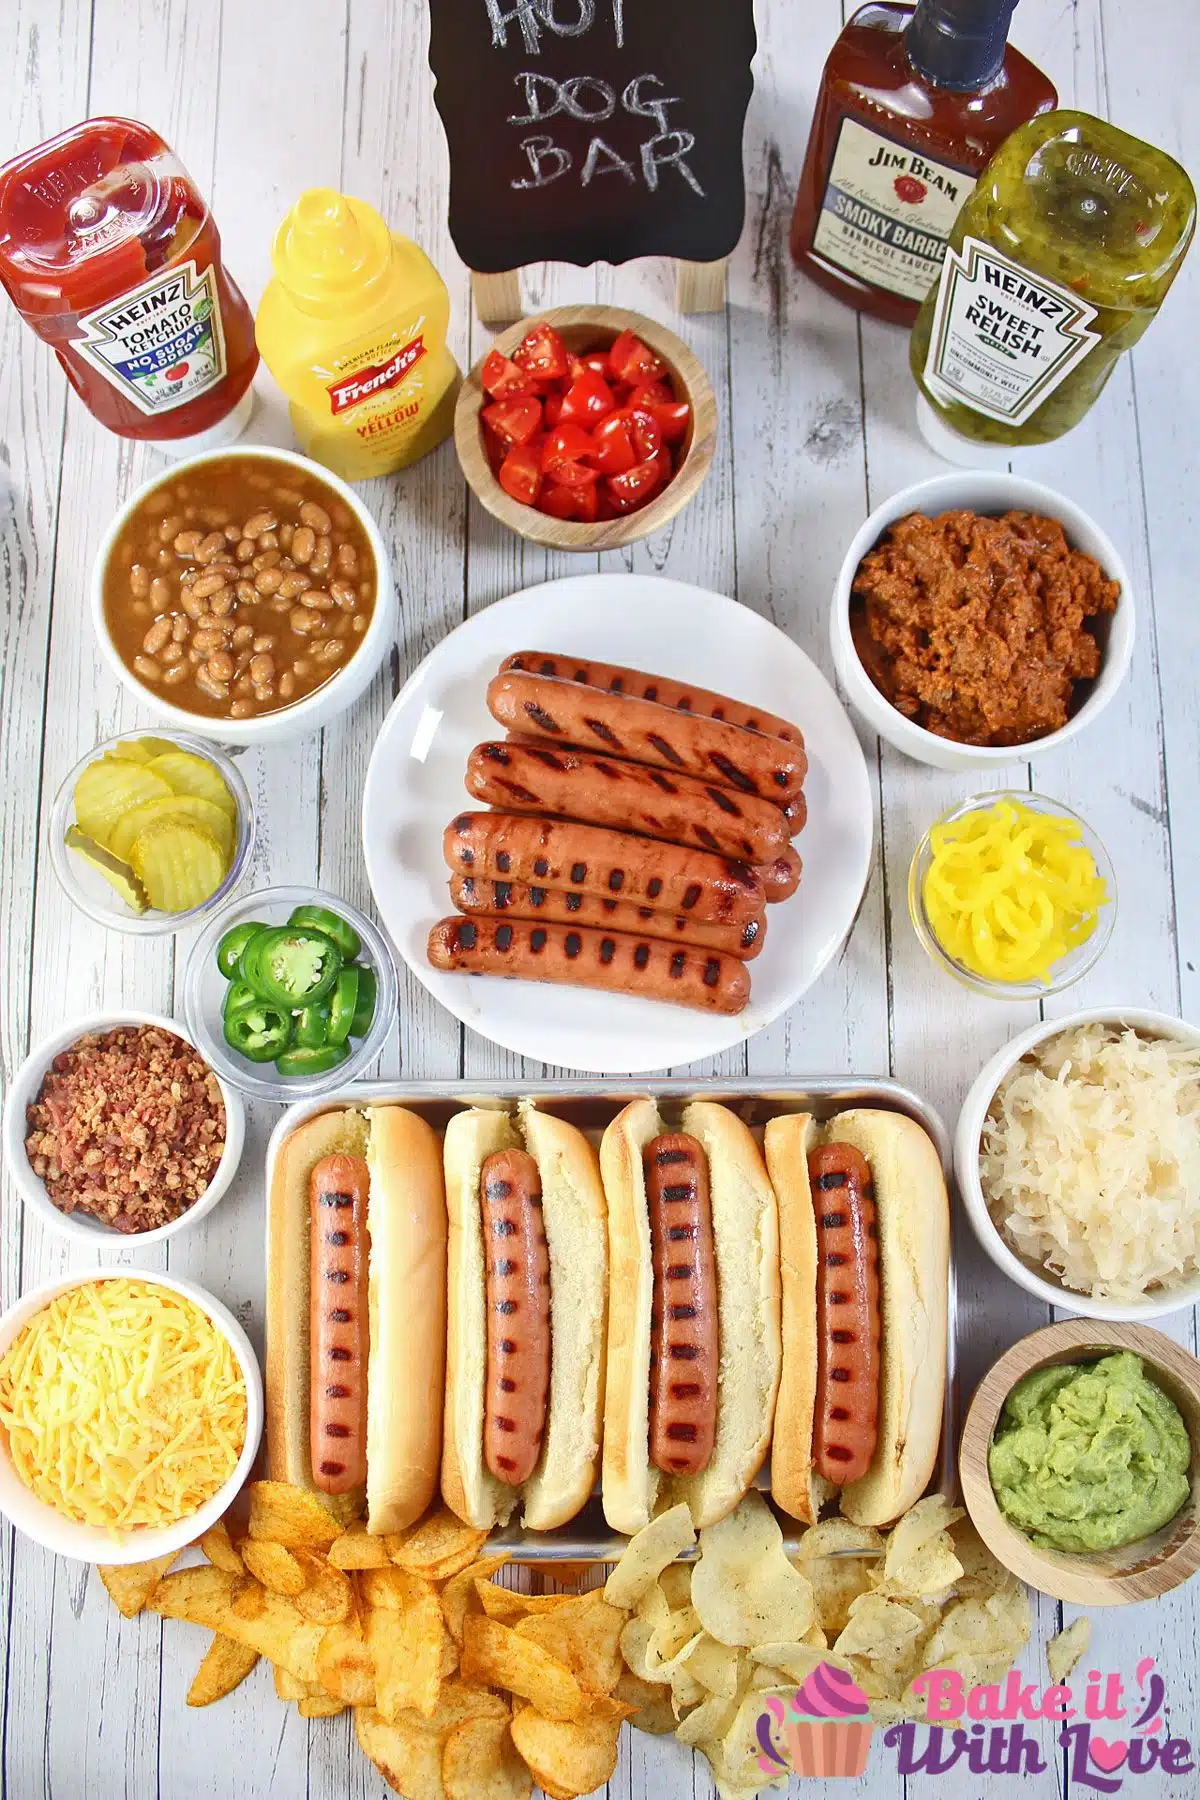 Hot dog bar essentials with condiments and bowls of favorite hot dog toppings ready to use.